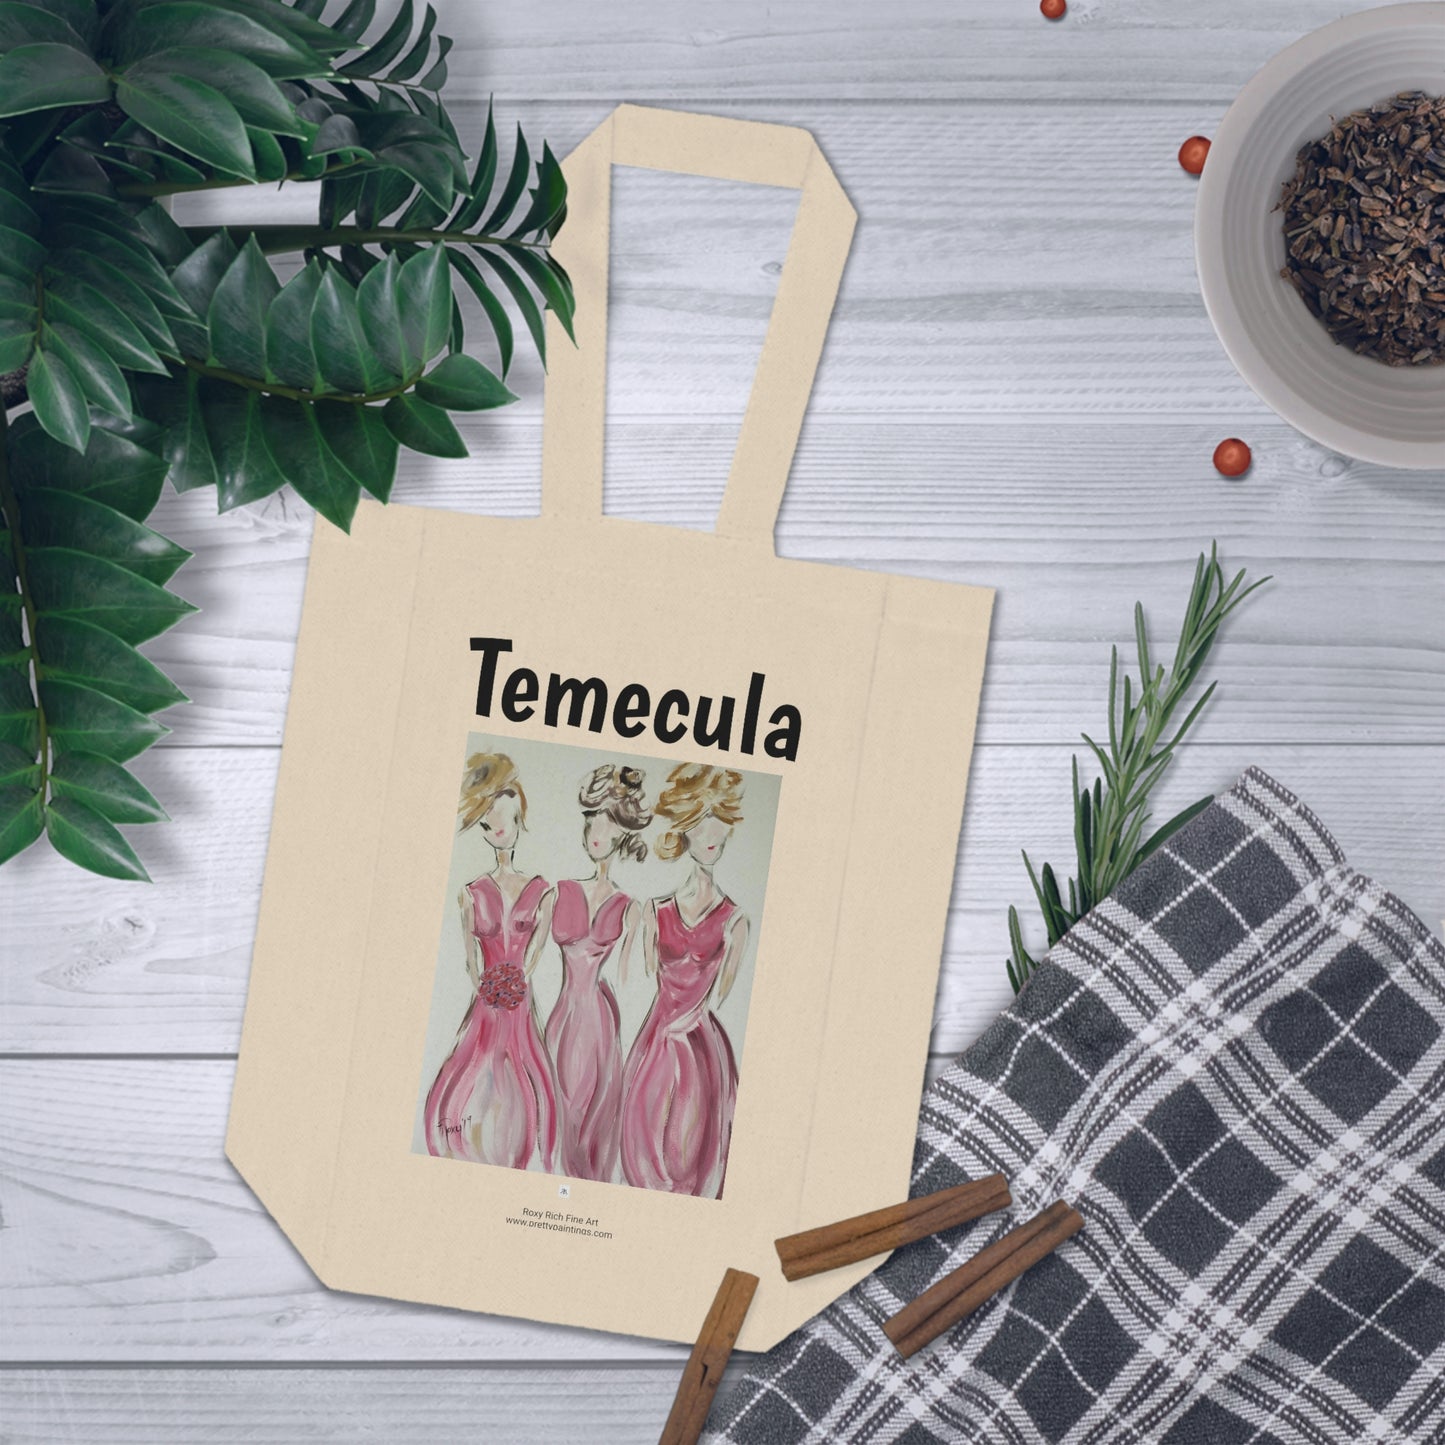 Temecula Double Wine Tote Bag featuring "Bridesmaids" painting